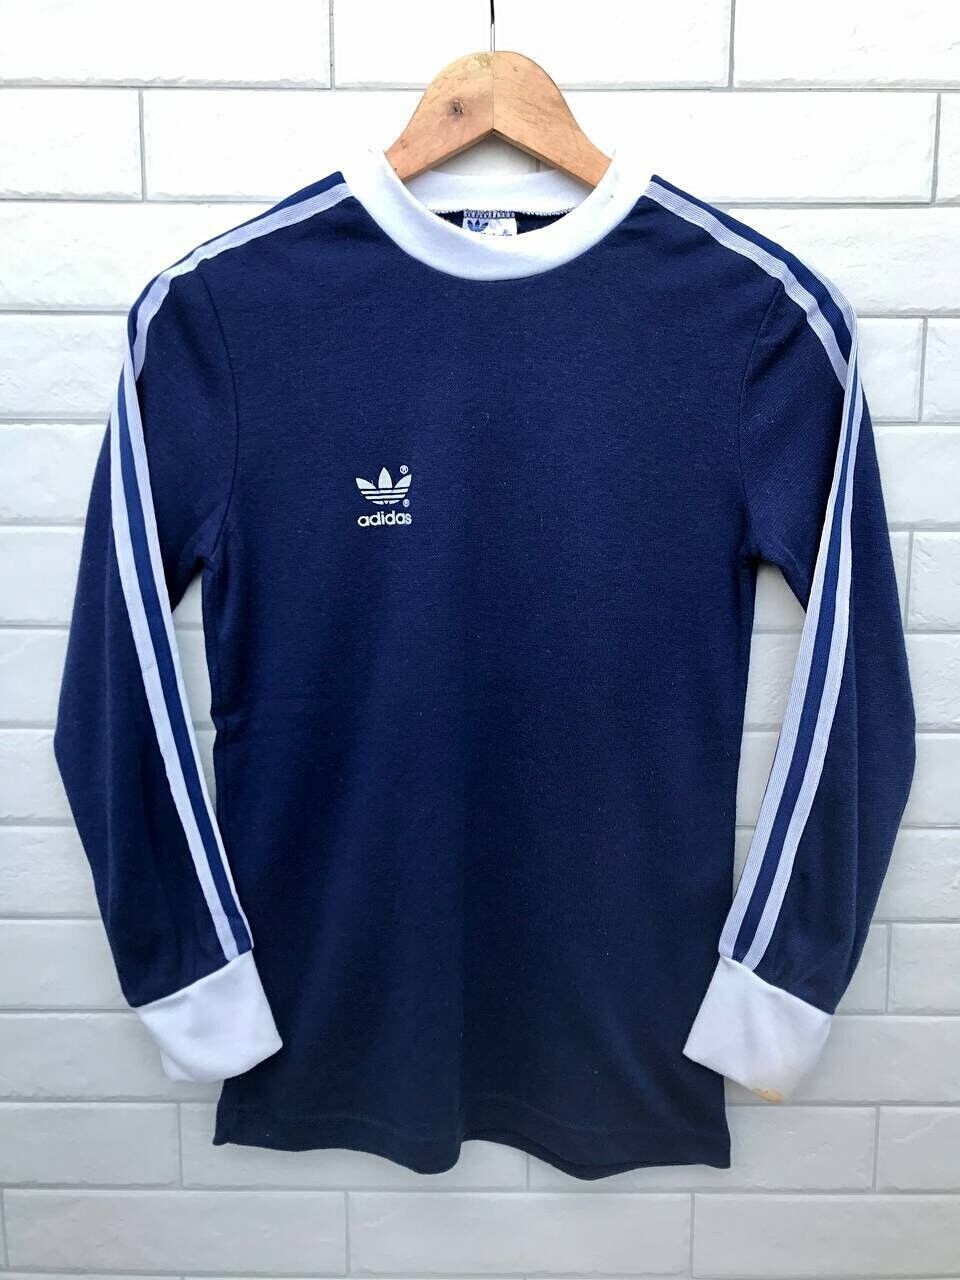 Vintage 70s 80s Adidas Football Long Sleeve Soccer Jersey Blue Adult Size S